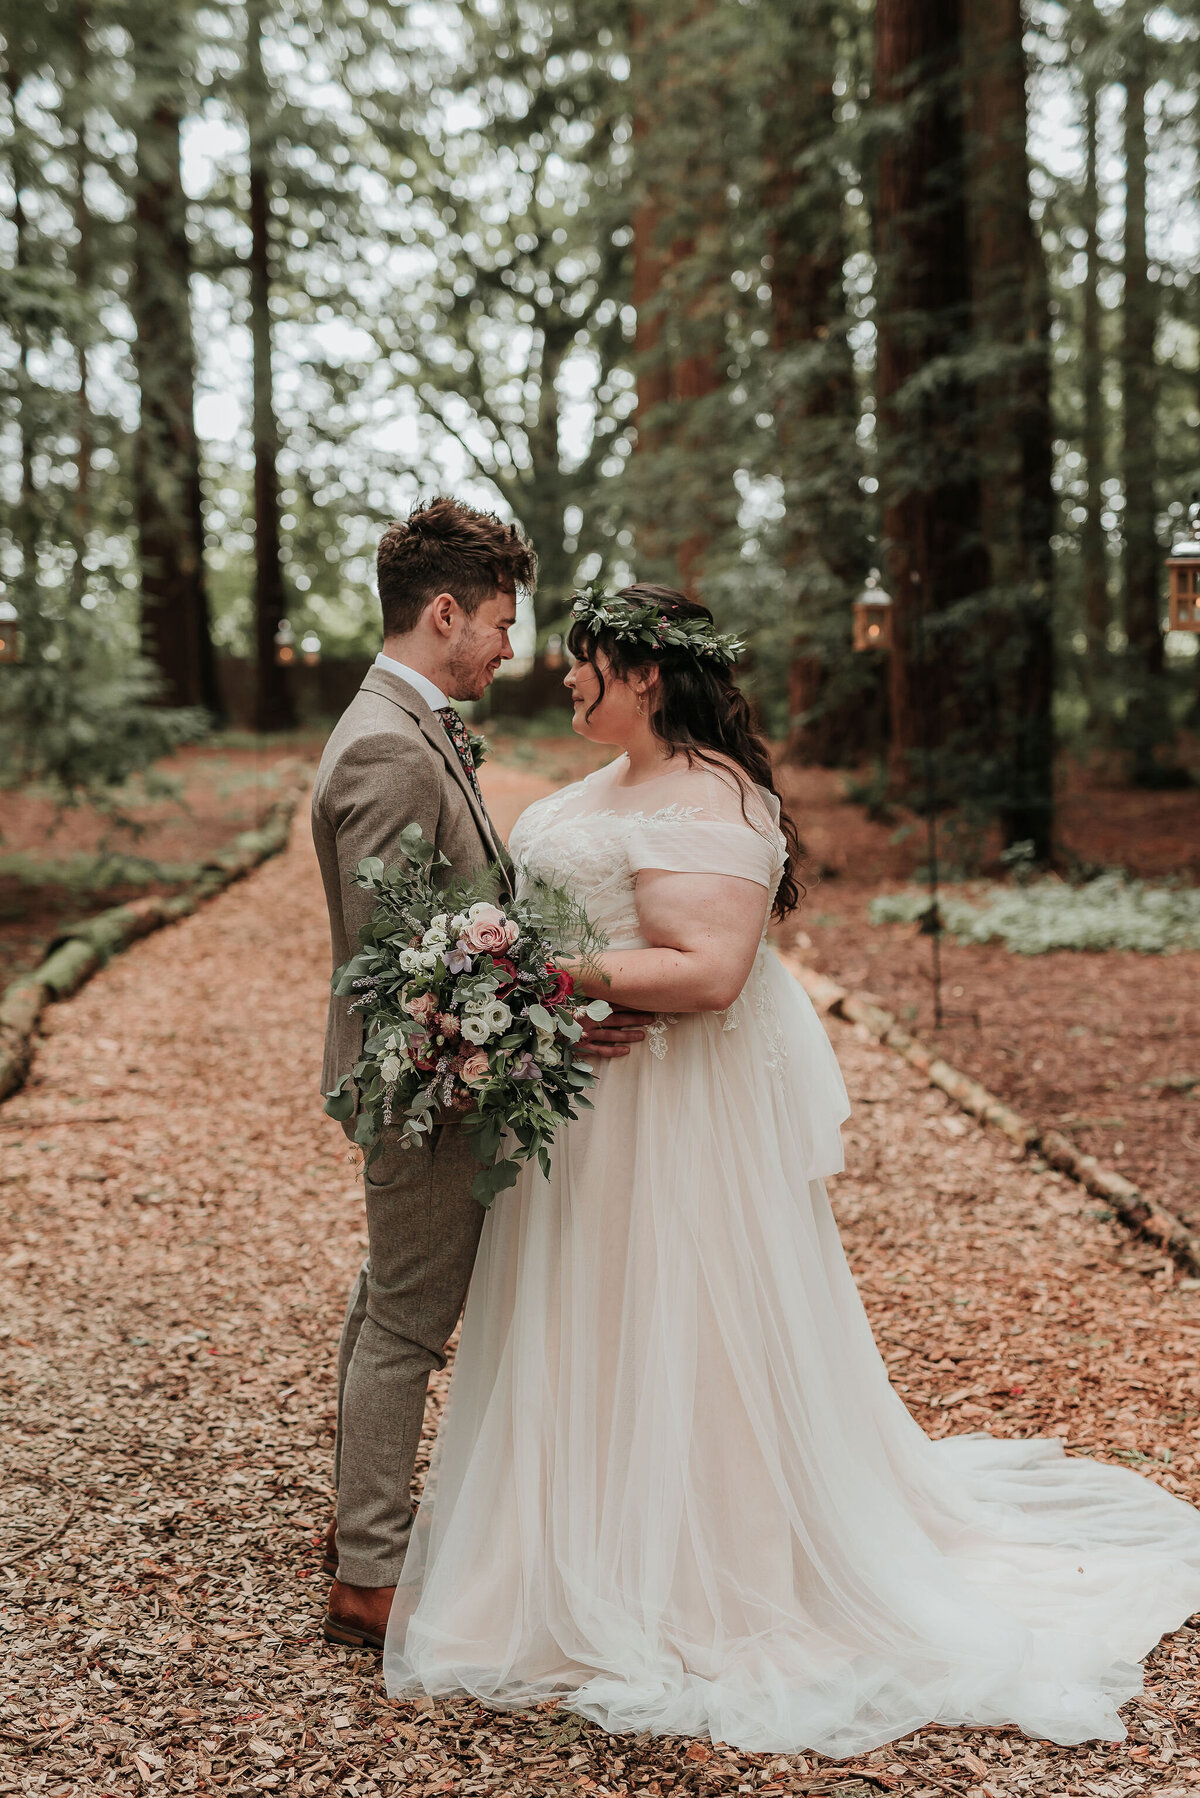 Bride and Groom holding whimsical bridal bouquet in the woods at their romantic woodland wedding at Two Woods Estate